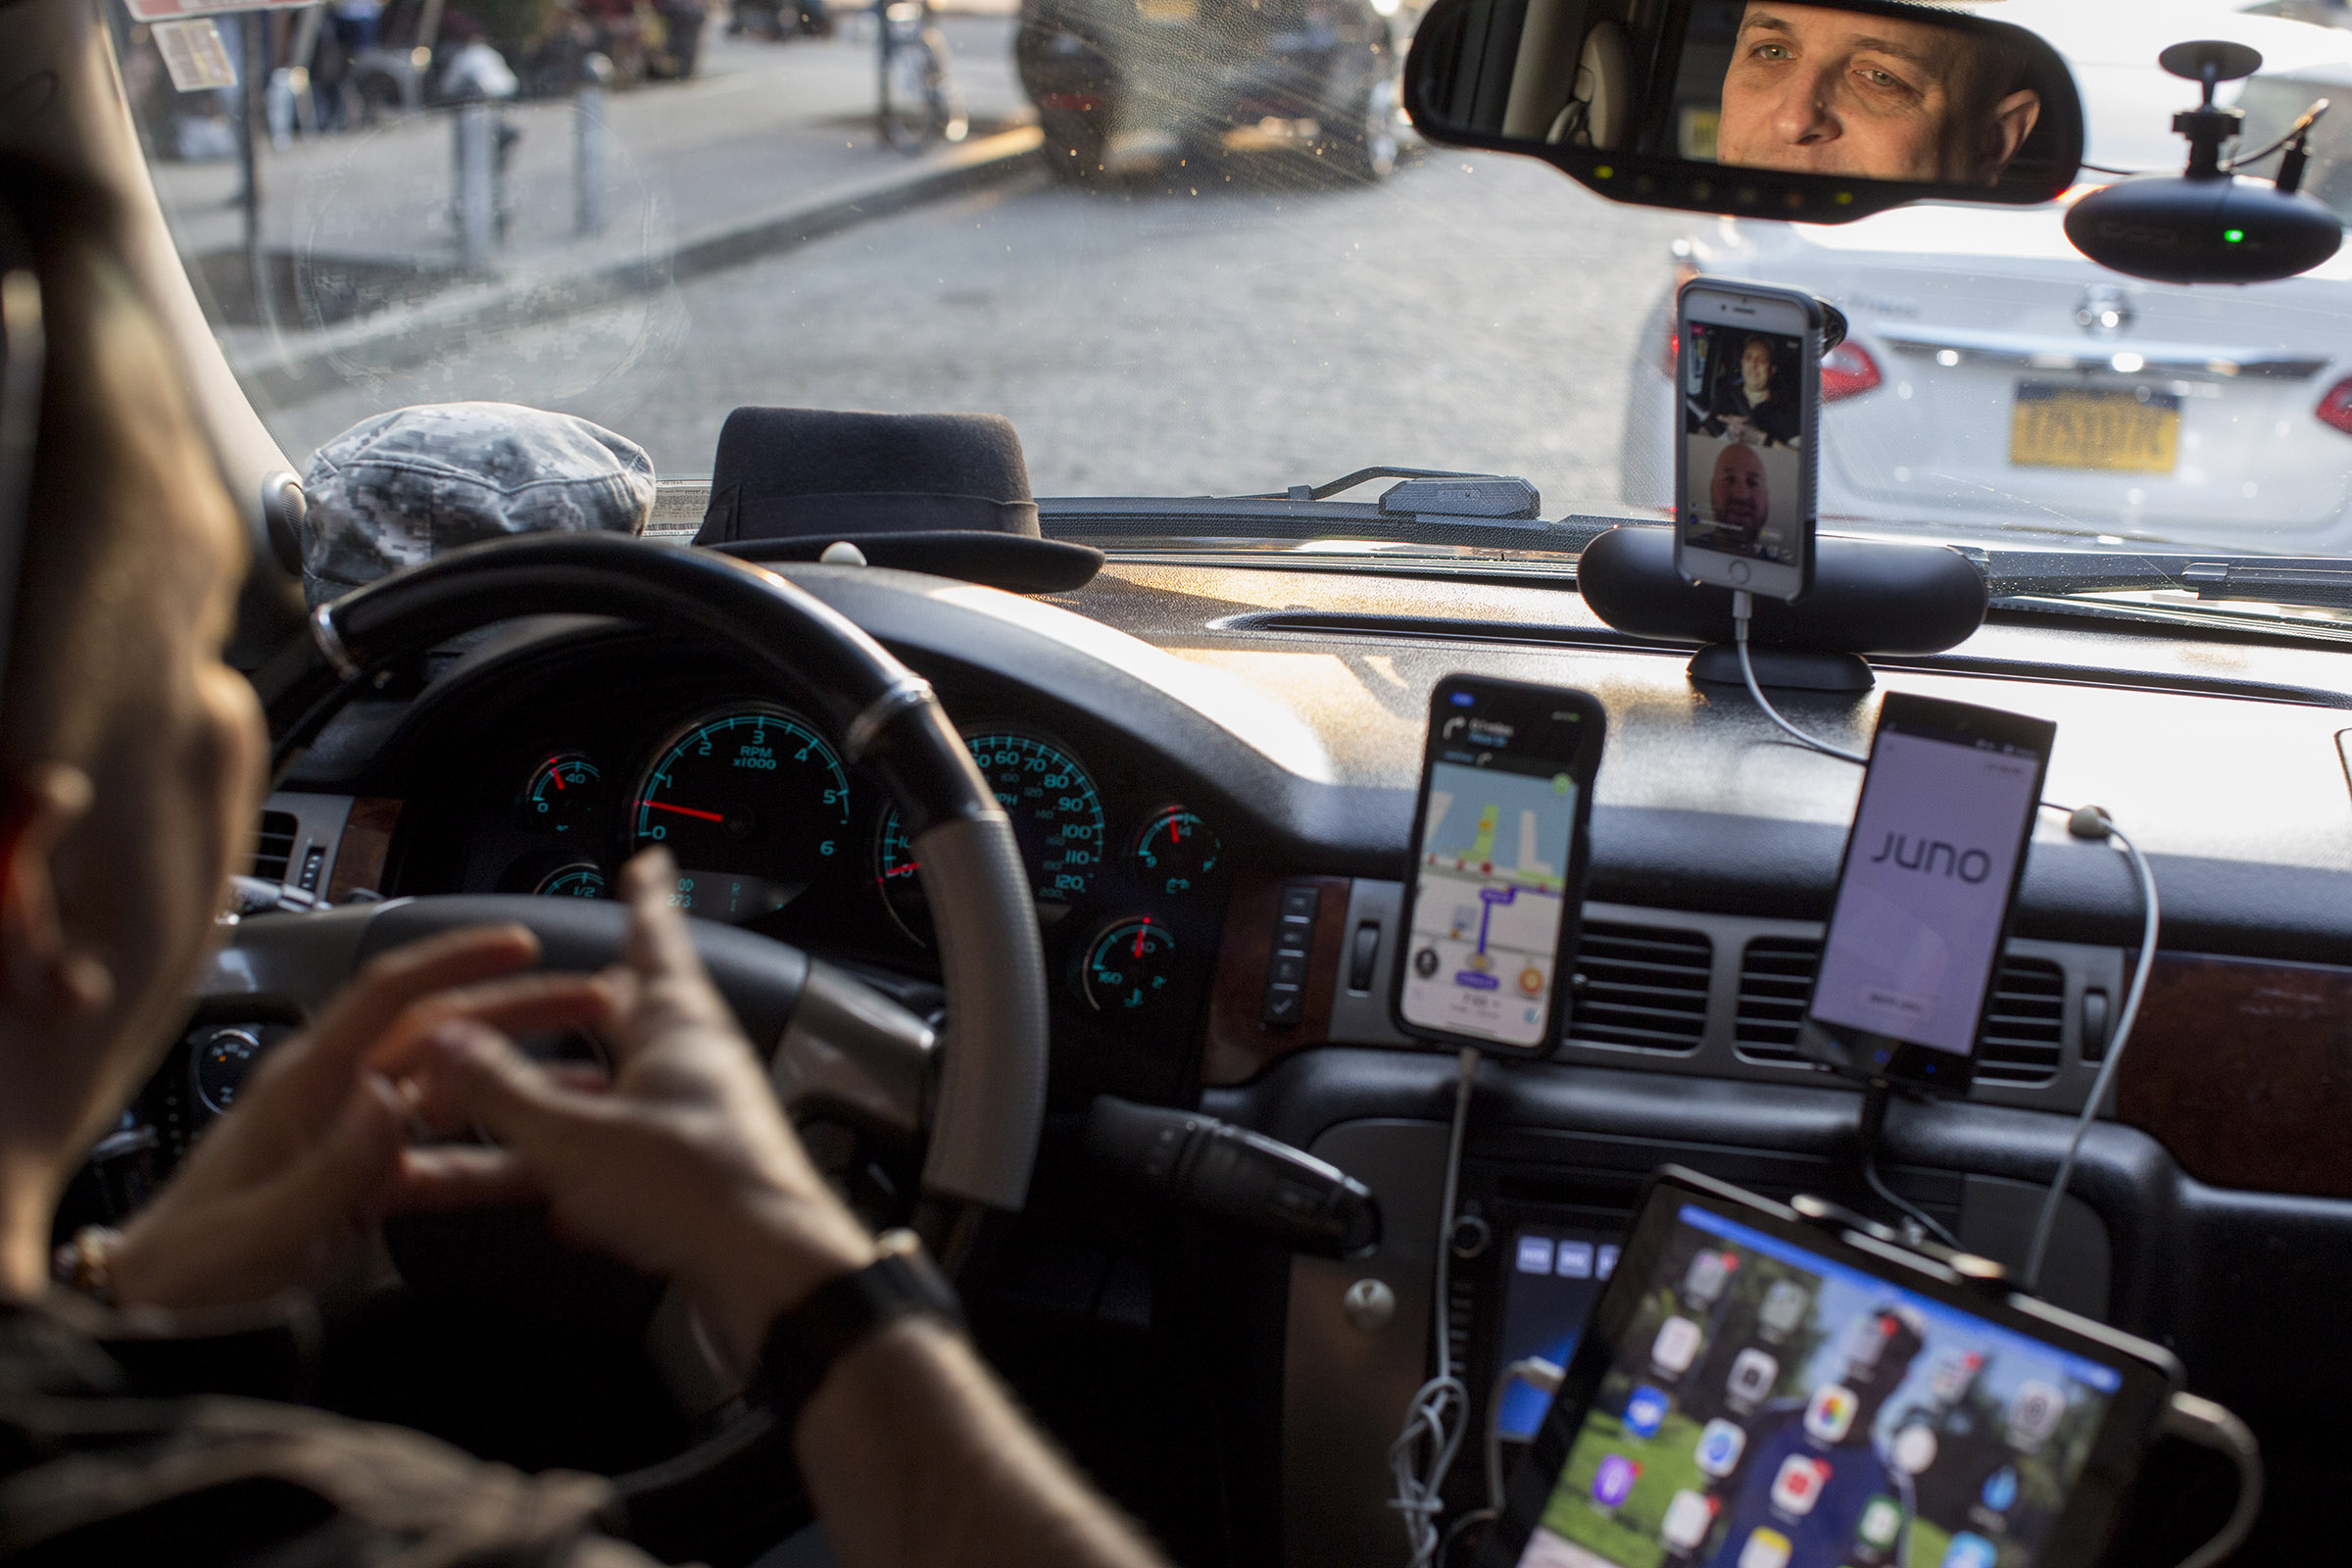 A driver for multiple ride-share companies with several devices on at once in New York, June 7, 2018. (Dave Sanders—The New York Times/Redux)